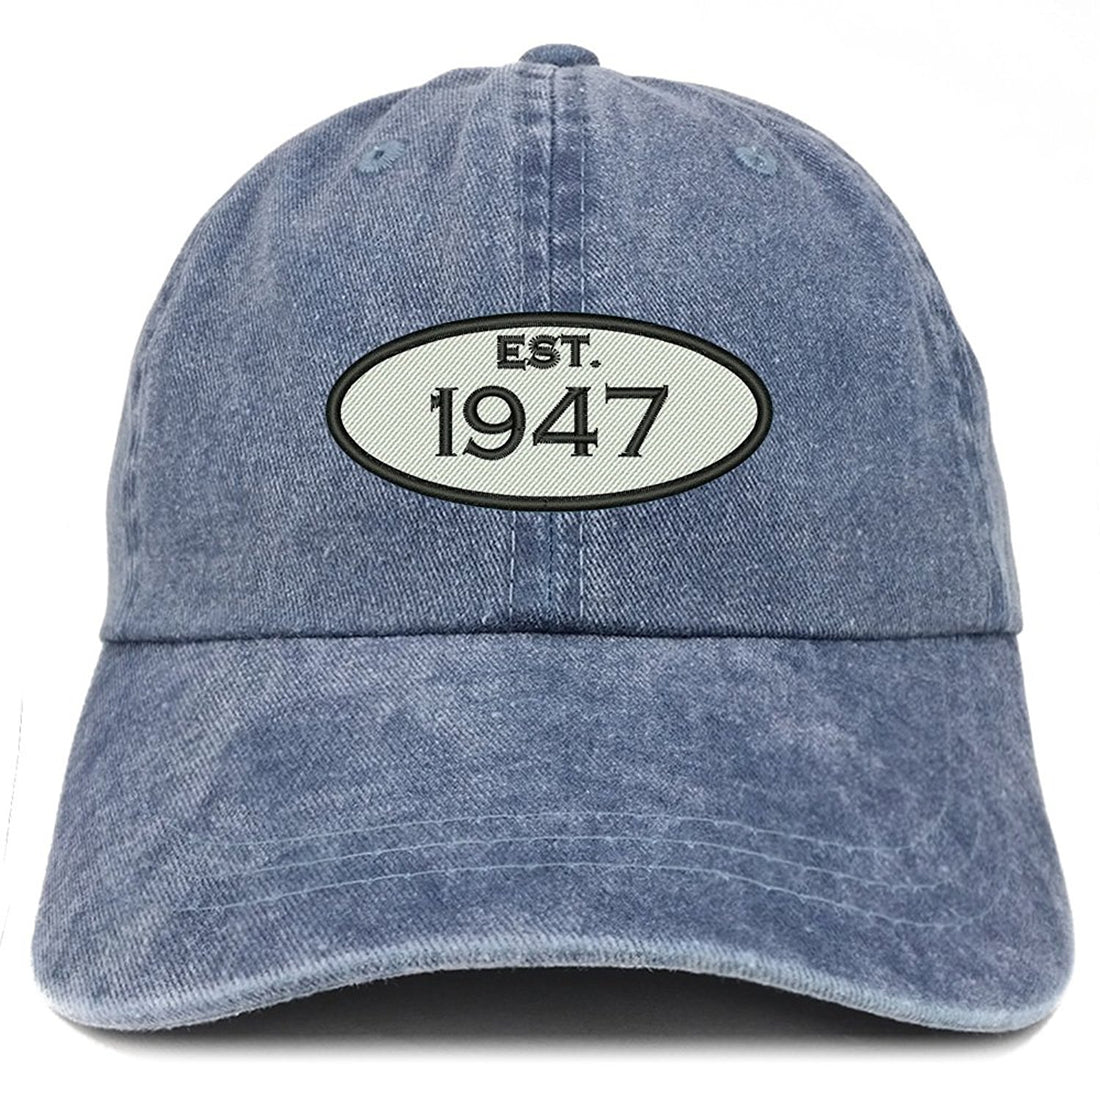 Trendy Apparel Shop Established 1947 Embroidered  Birthday Gift Pigment Dyed Washed Cotton Cap